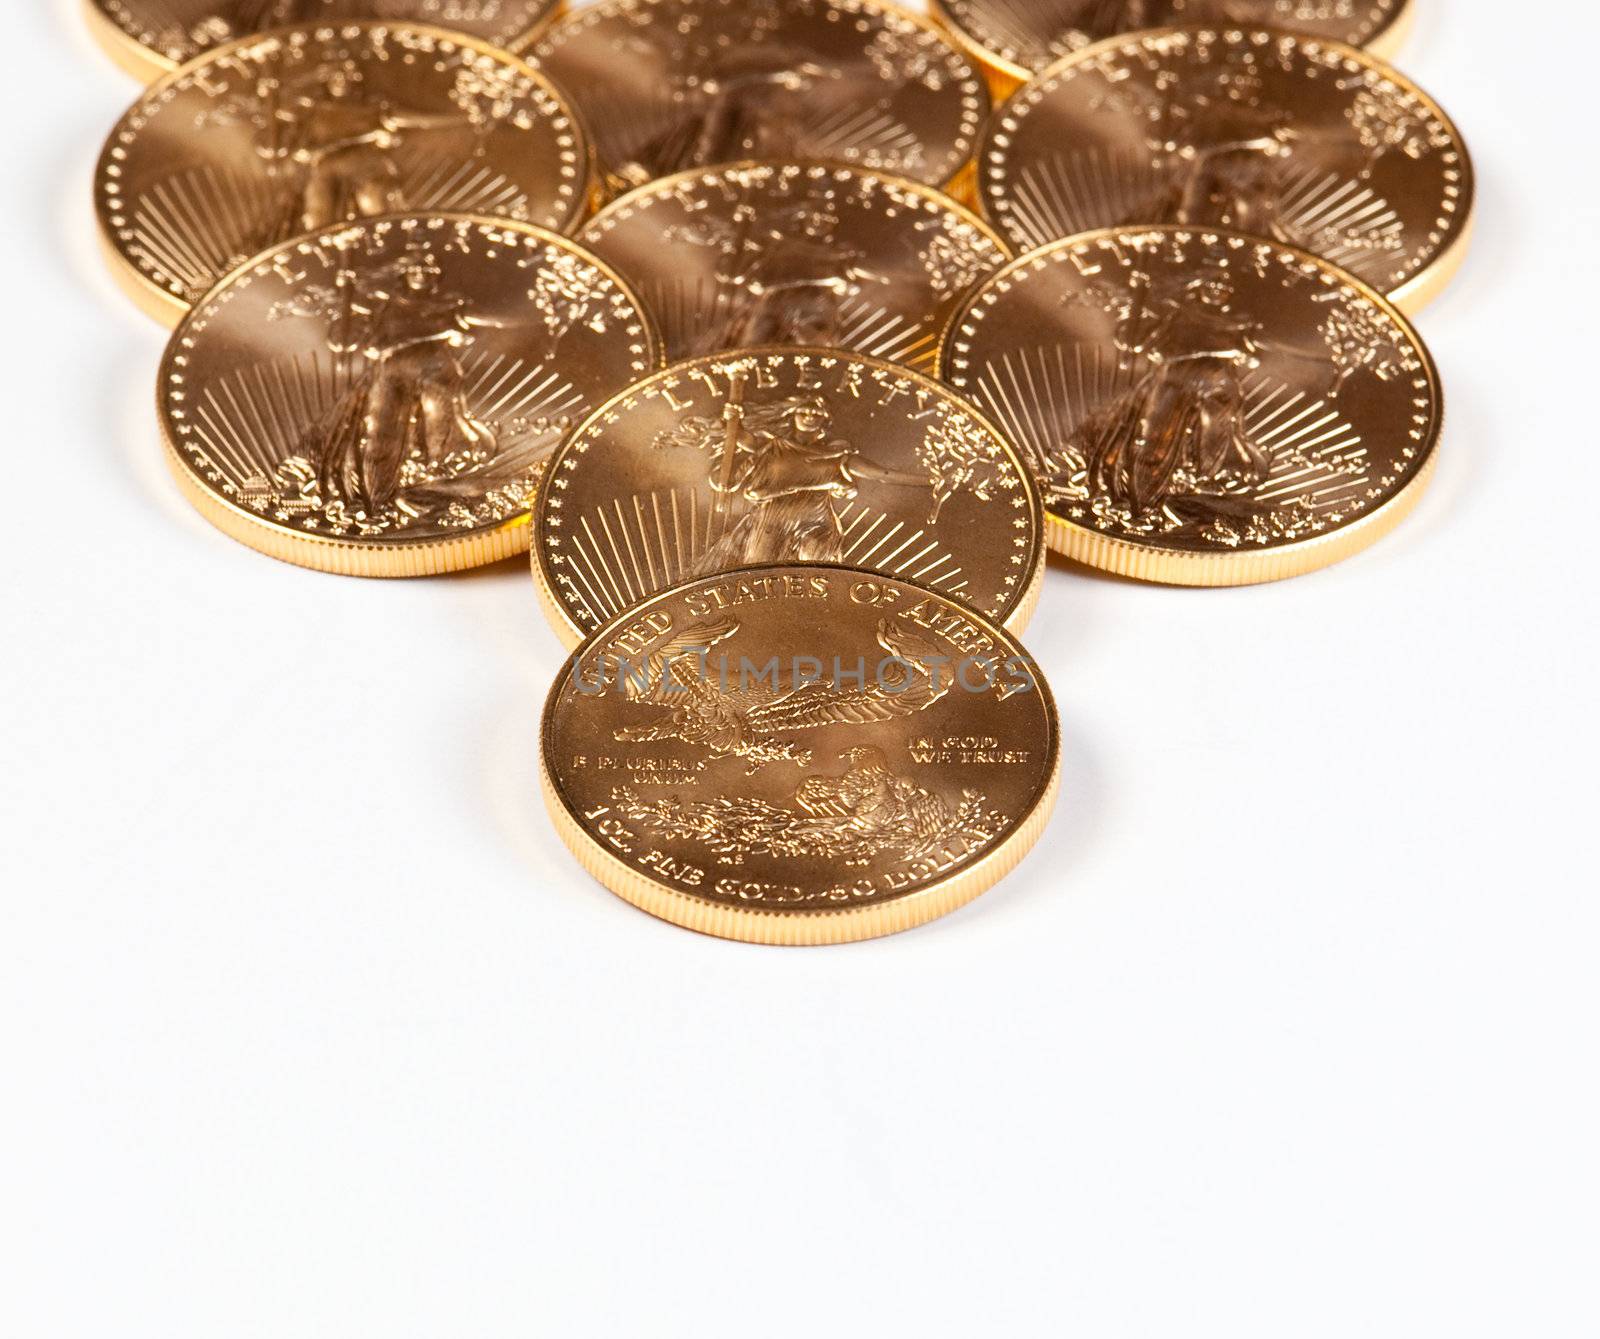 Receding stack of gold coins by steheap